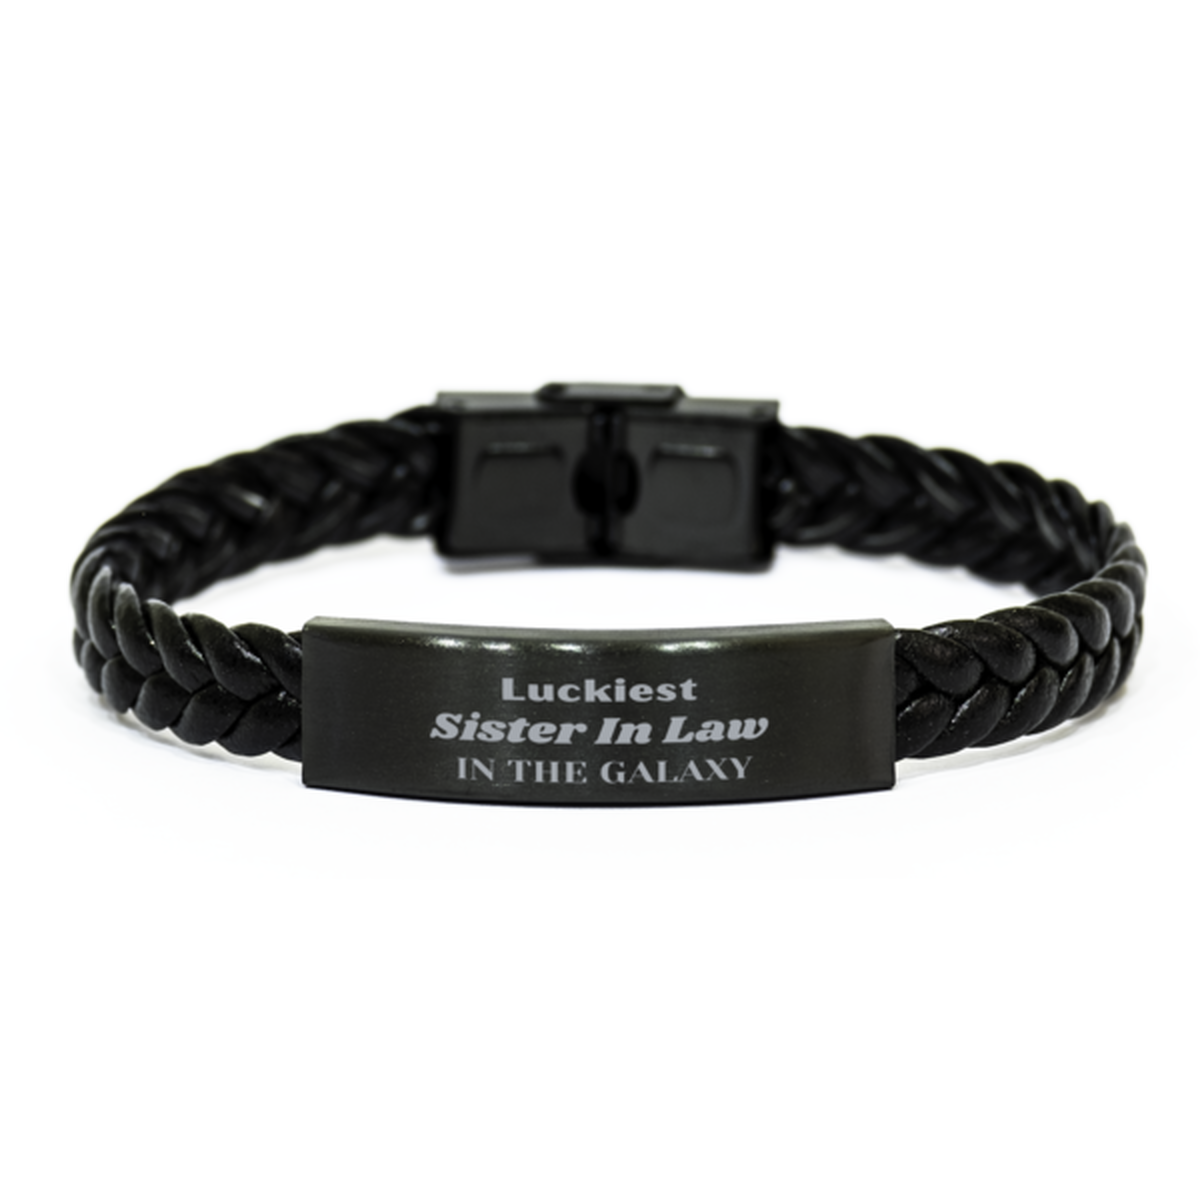 Luckiest Sister In Law in the Galaxy, To My Sister In Law Engraved Gifts, Christmas Sister In Law Braided Leather Bracelet Gifts, X-mas Birthday Unique Gifts For Sister In Law Men Women